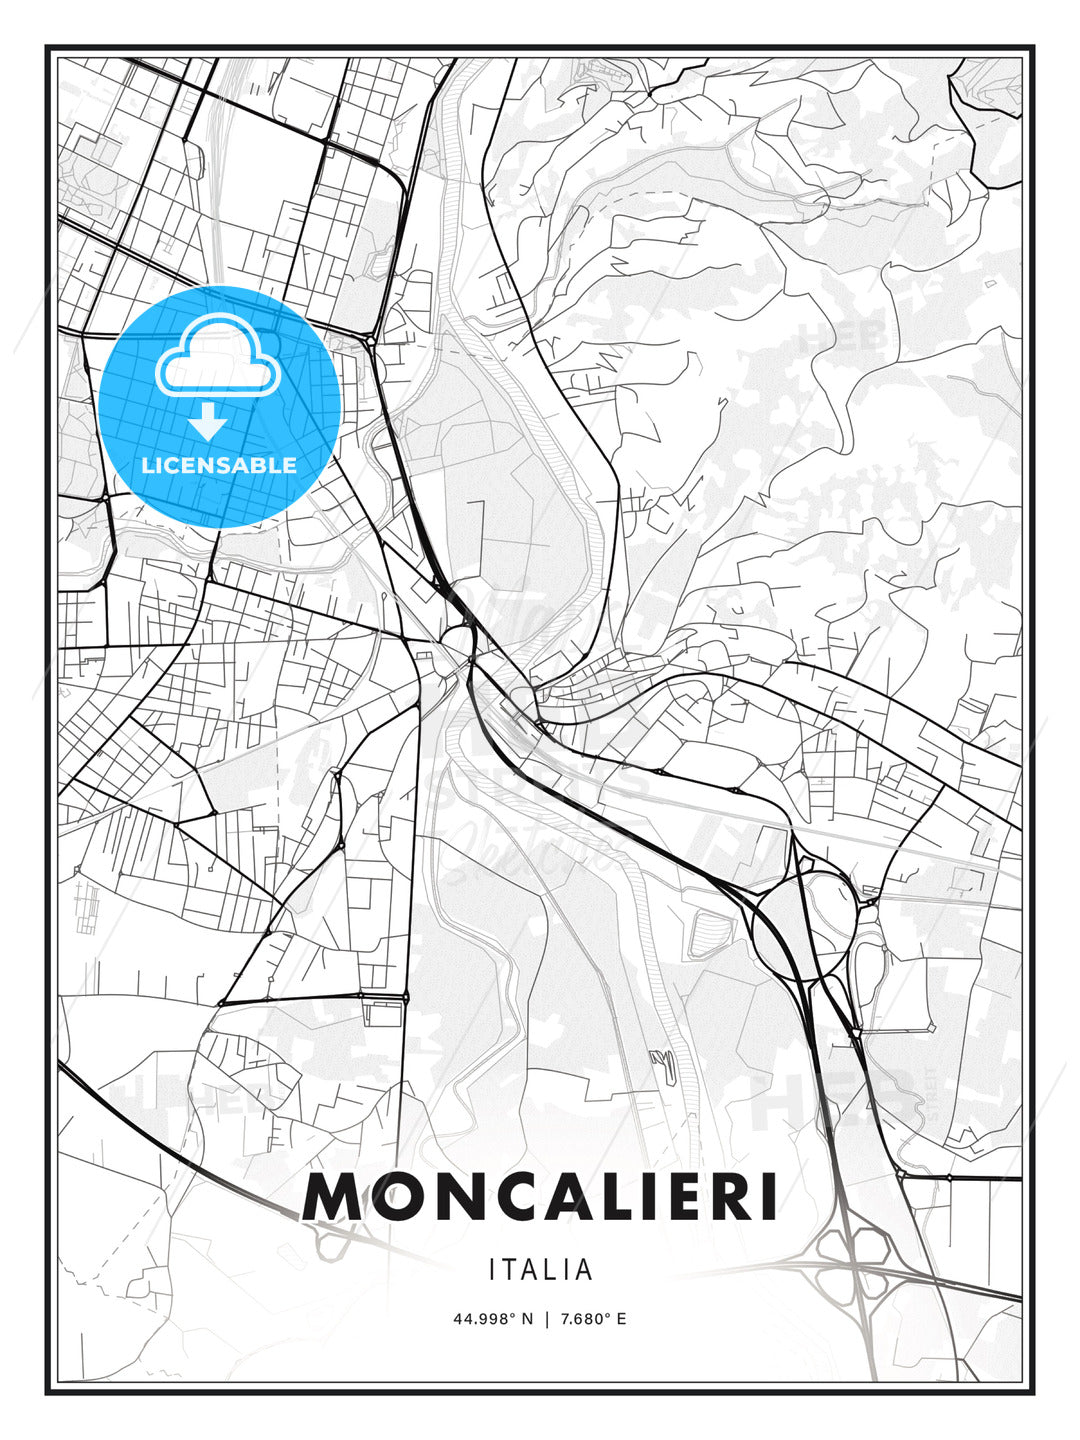 Moncalieri, Italy, Modern Print Template in Various Formats - HEBSTREITS Sketches